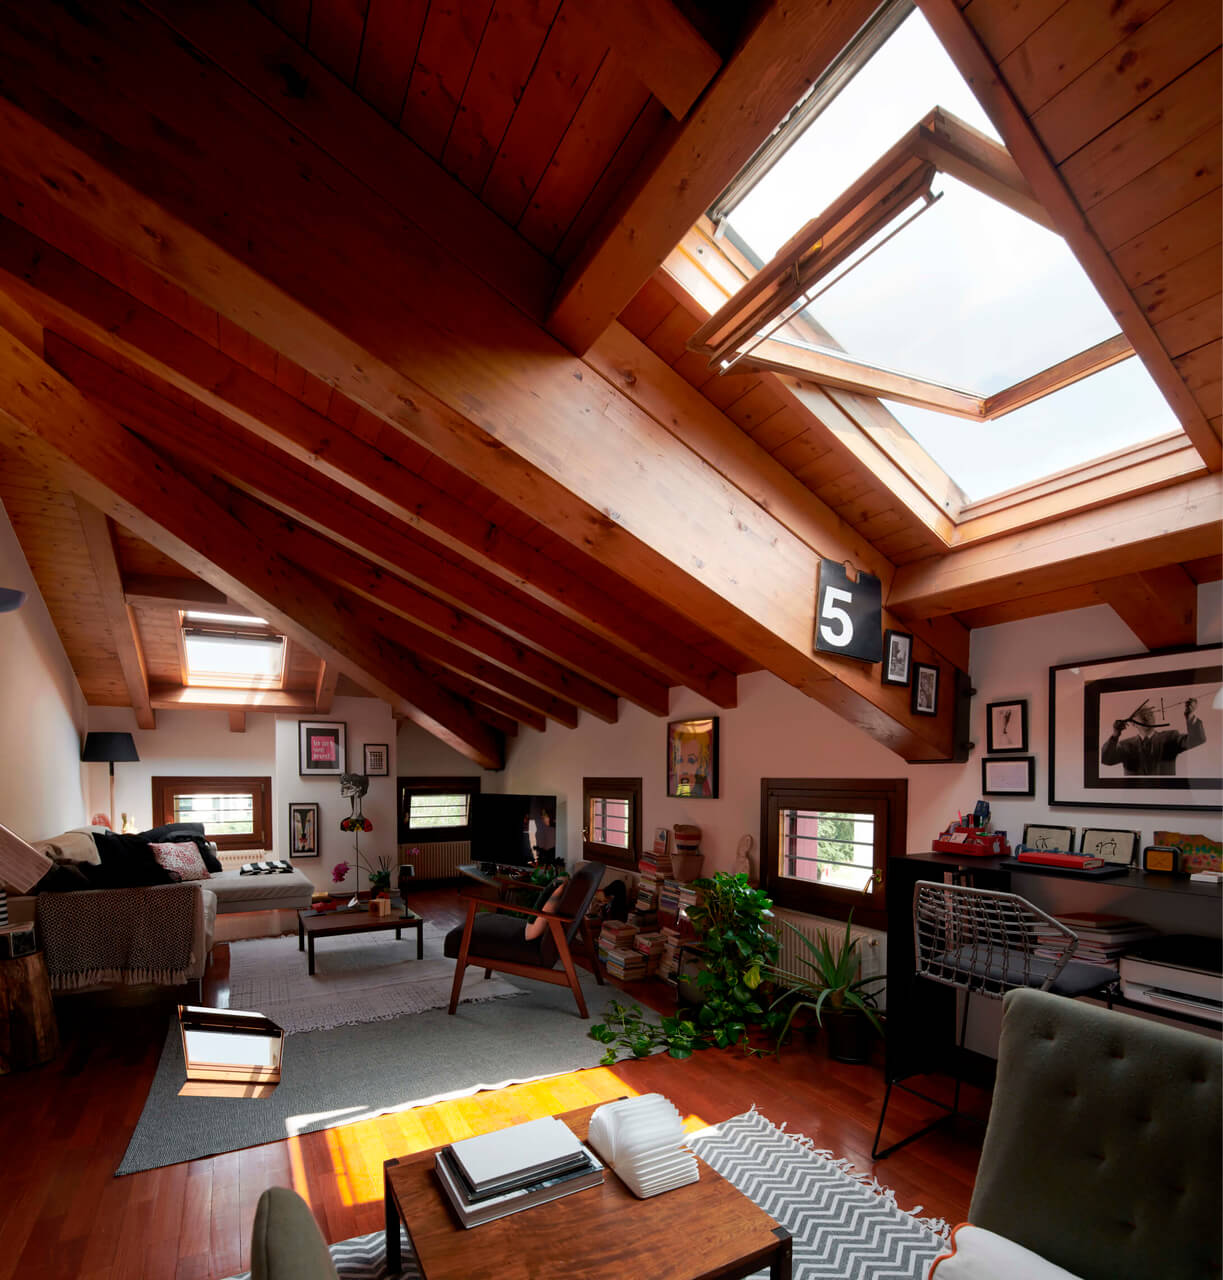 An open roof window in the living room area in the attic